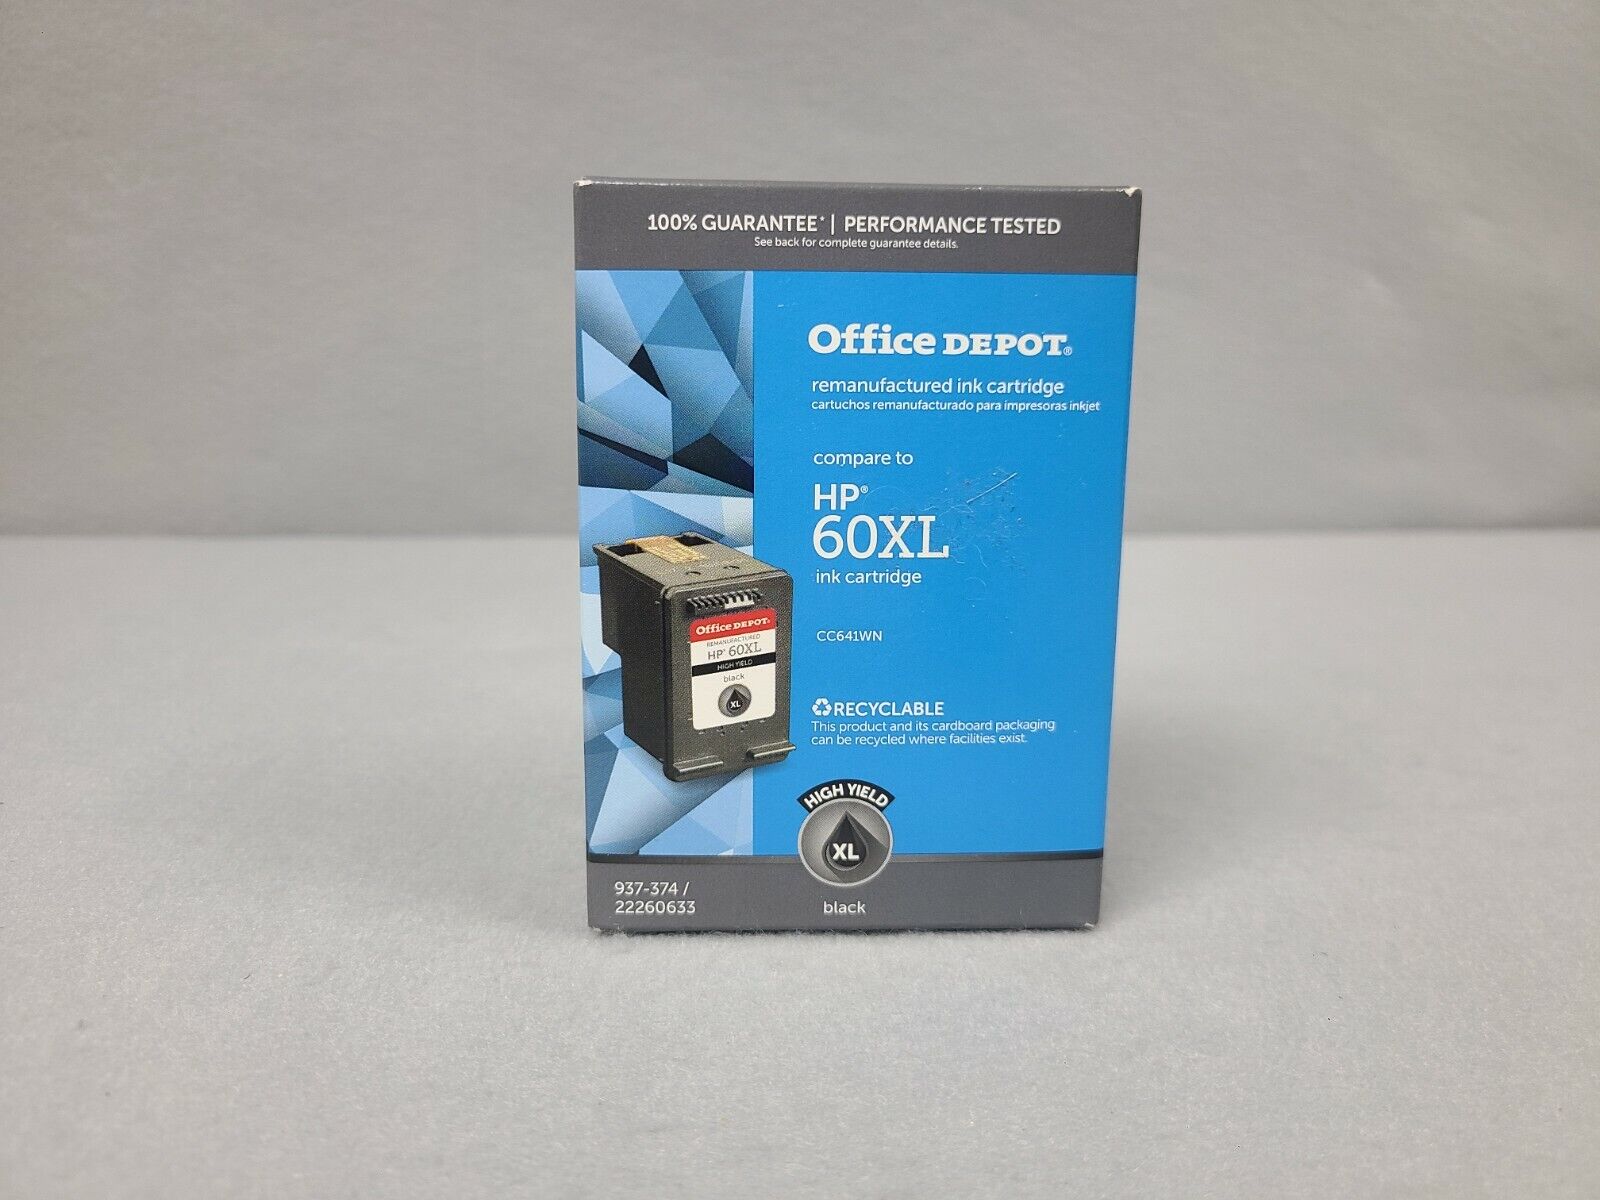 Office Depot Remanufactured Ink Cartridge Compare to HP 60XL Black 937-374